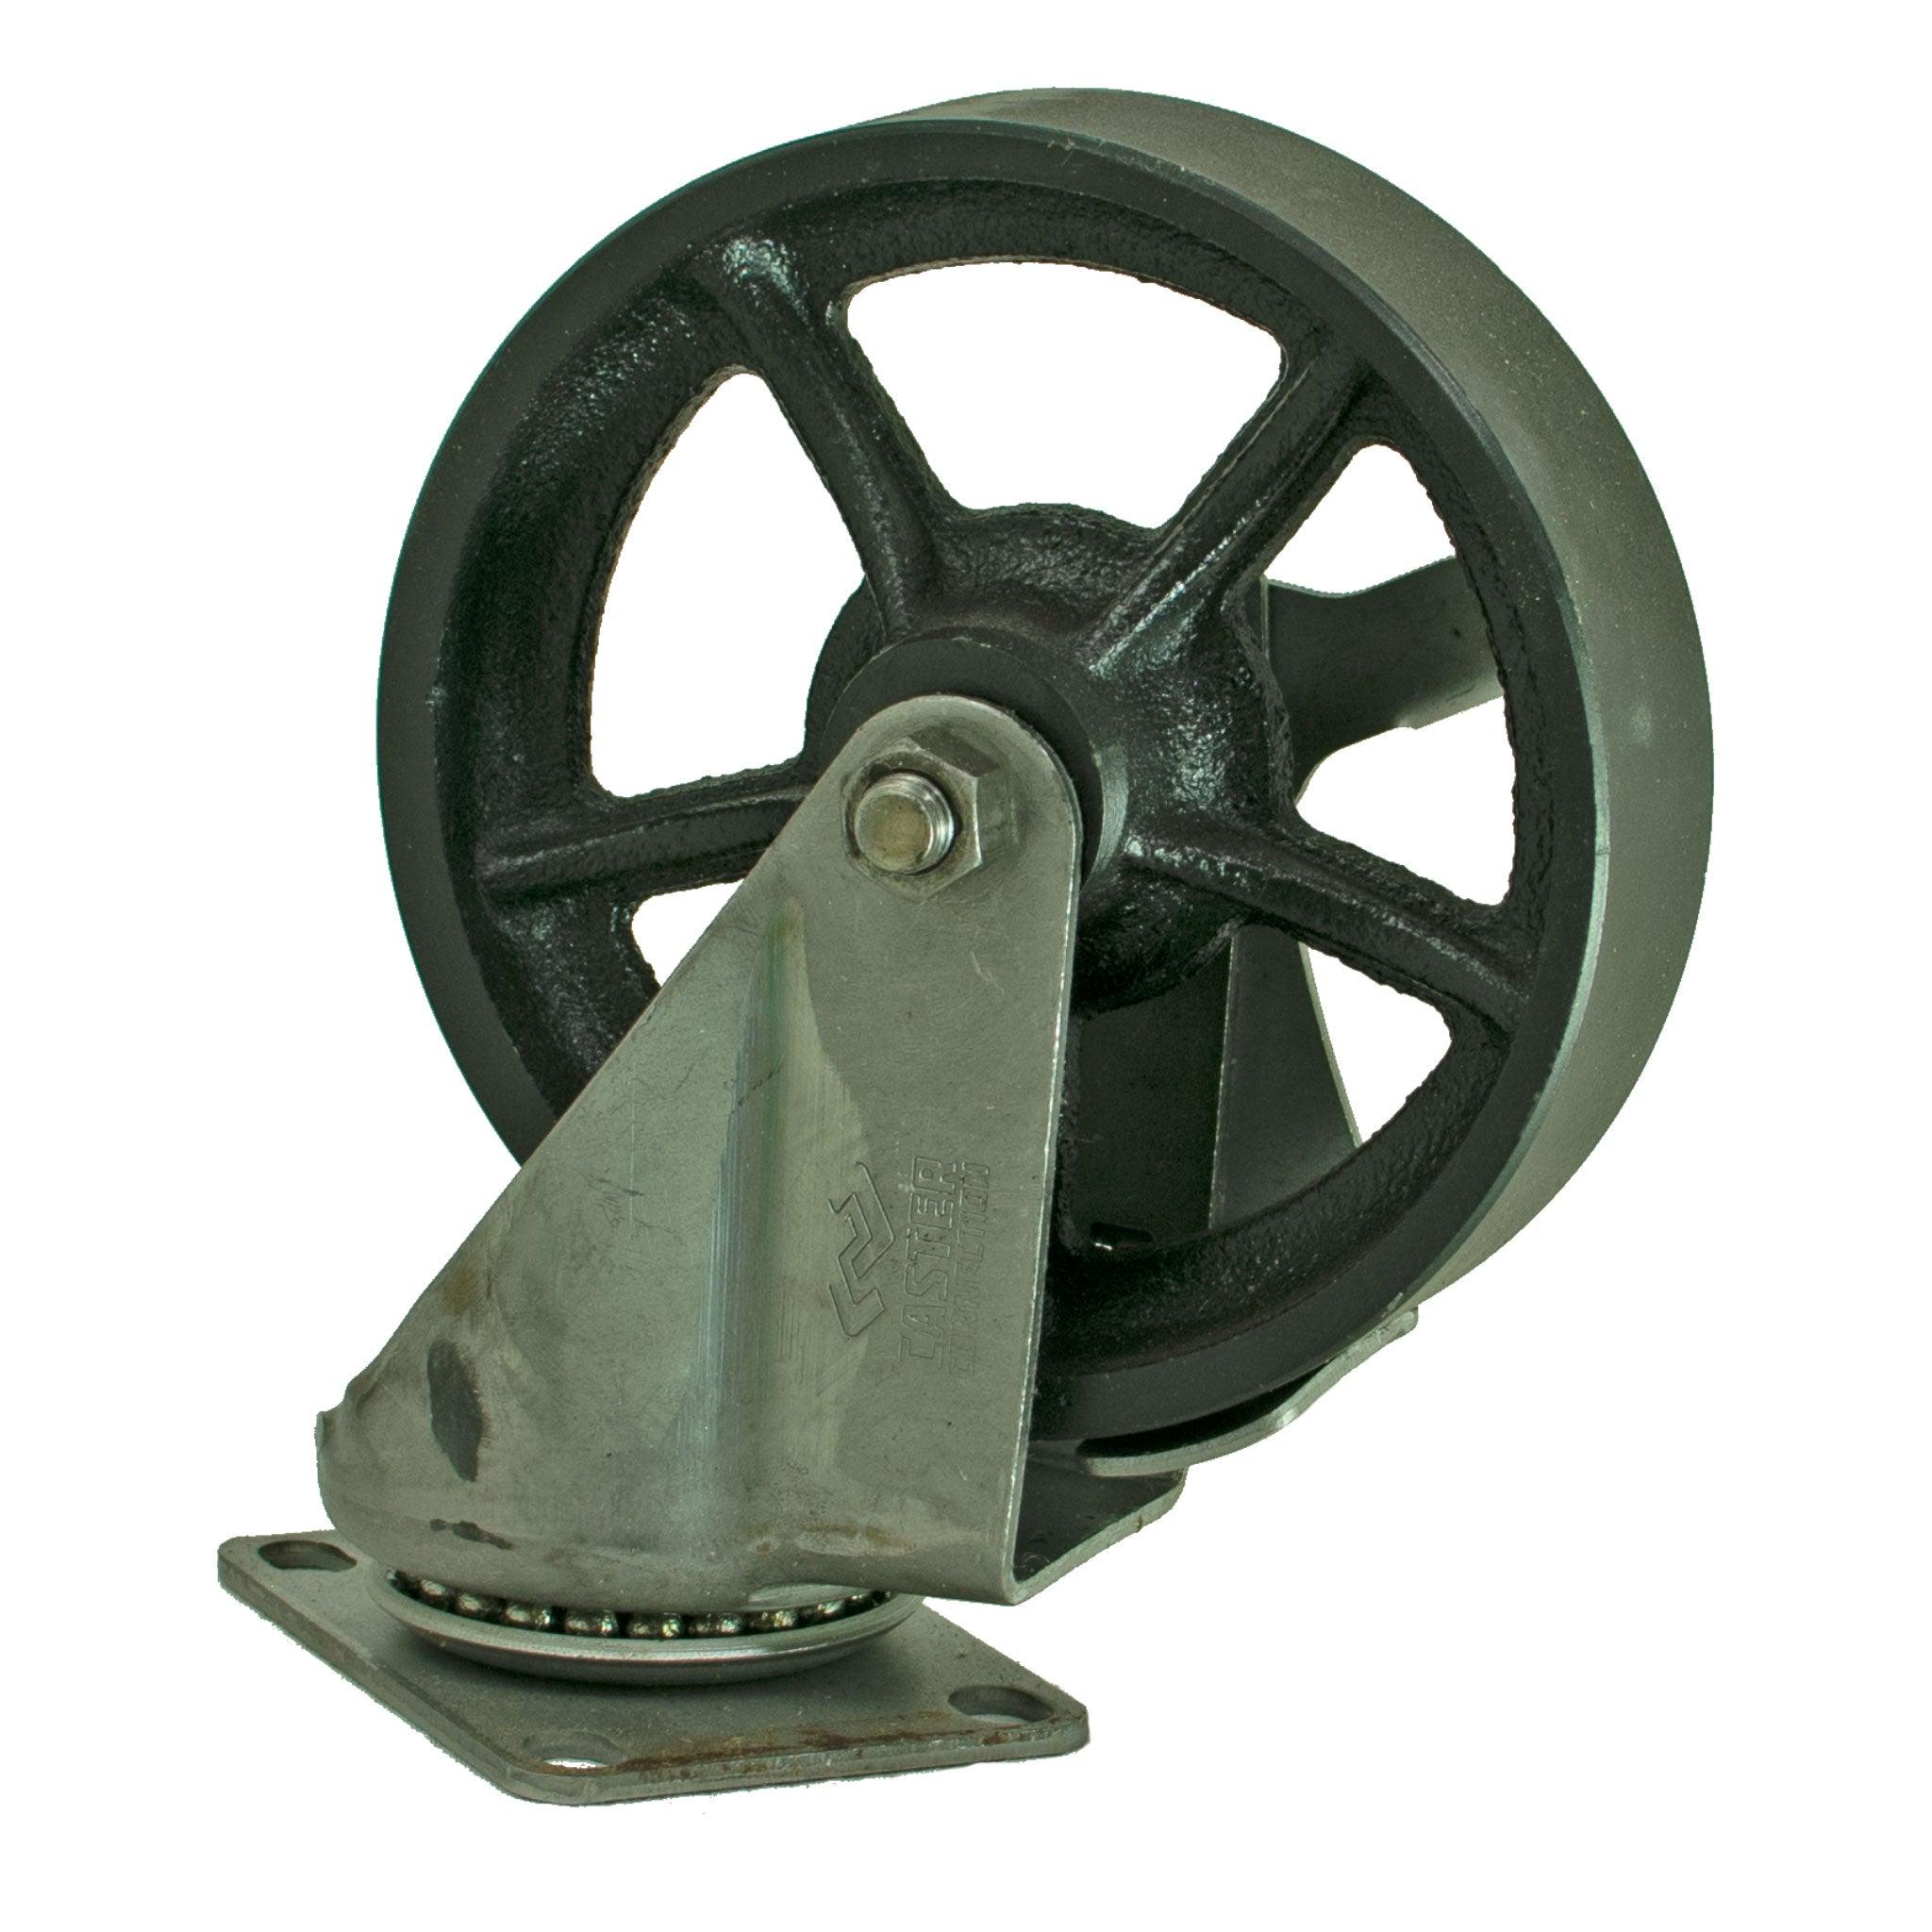 6in Vintage Casters - Swivel with Brakes